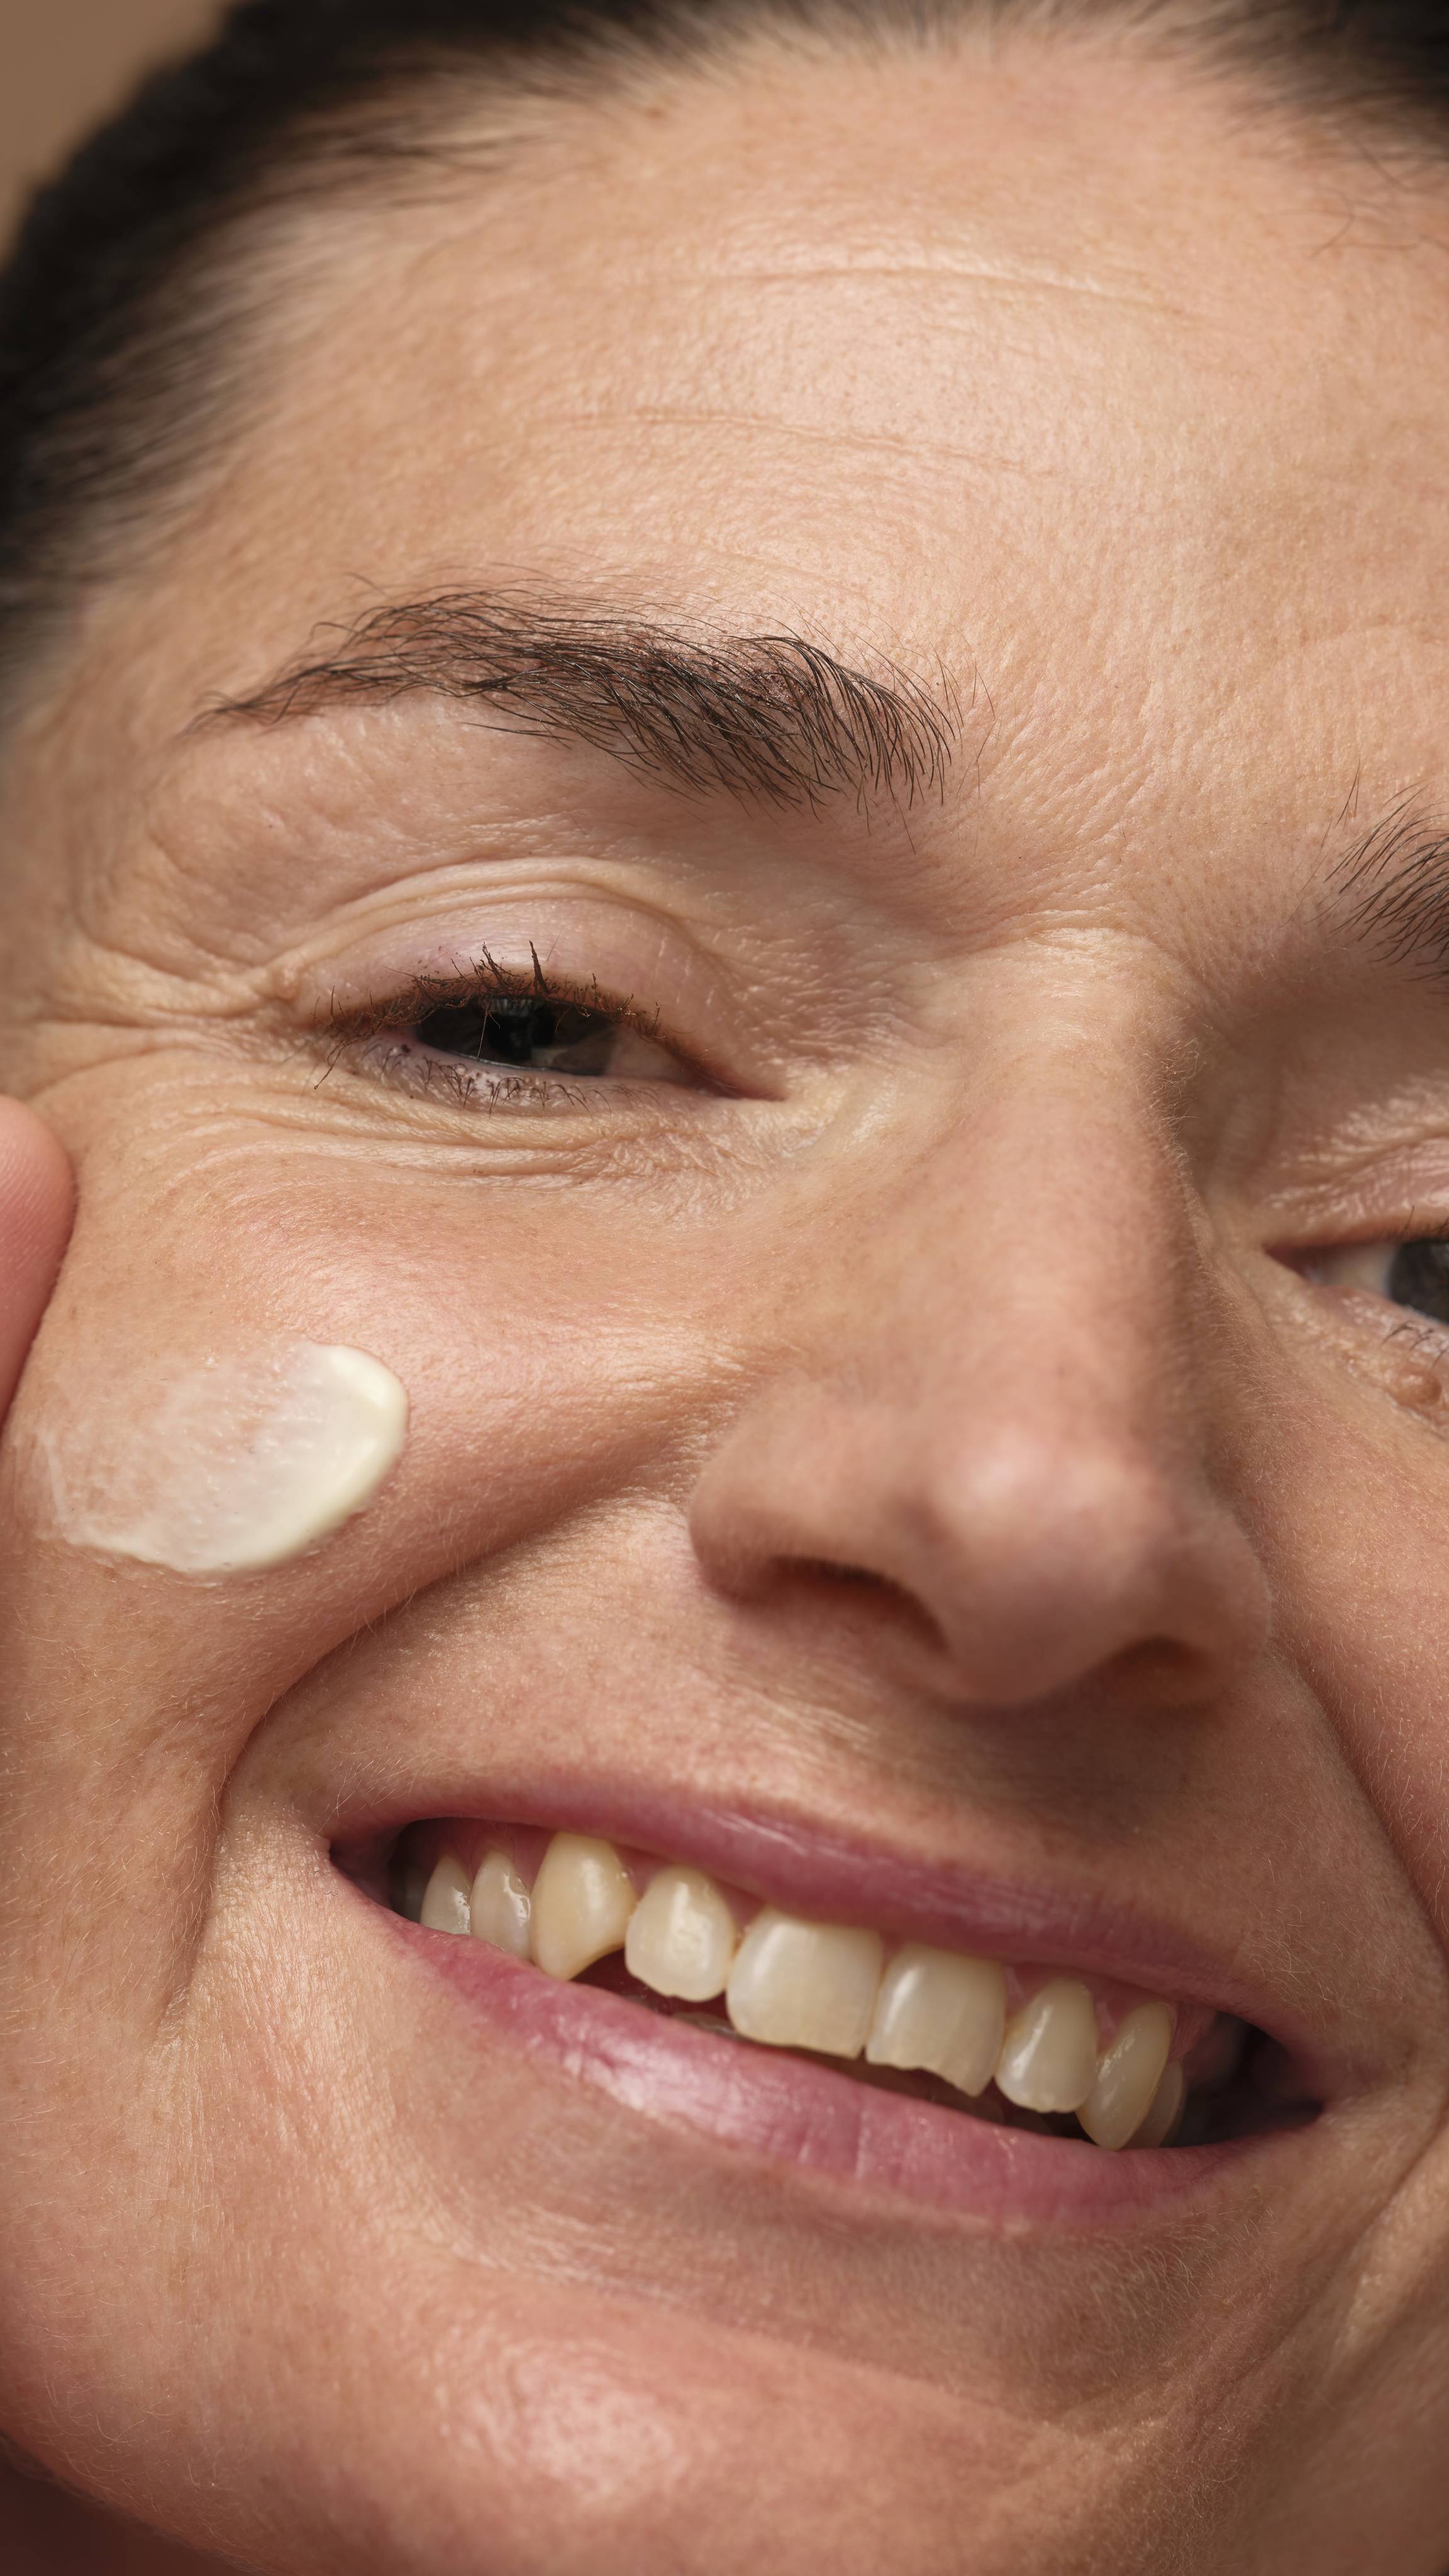 A close-up of half of the model's face as they are smiling while they gently sweep the self-preserving moisturiser over their cheek. 